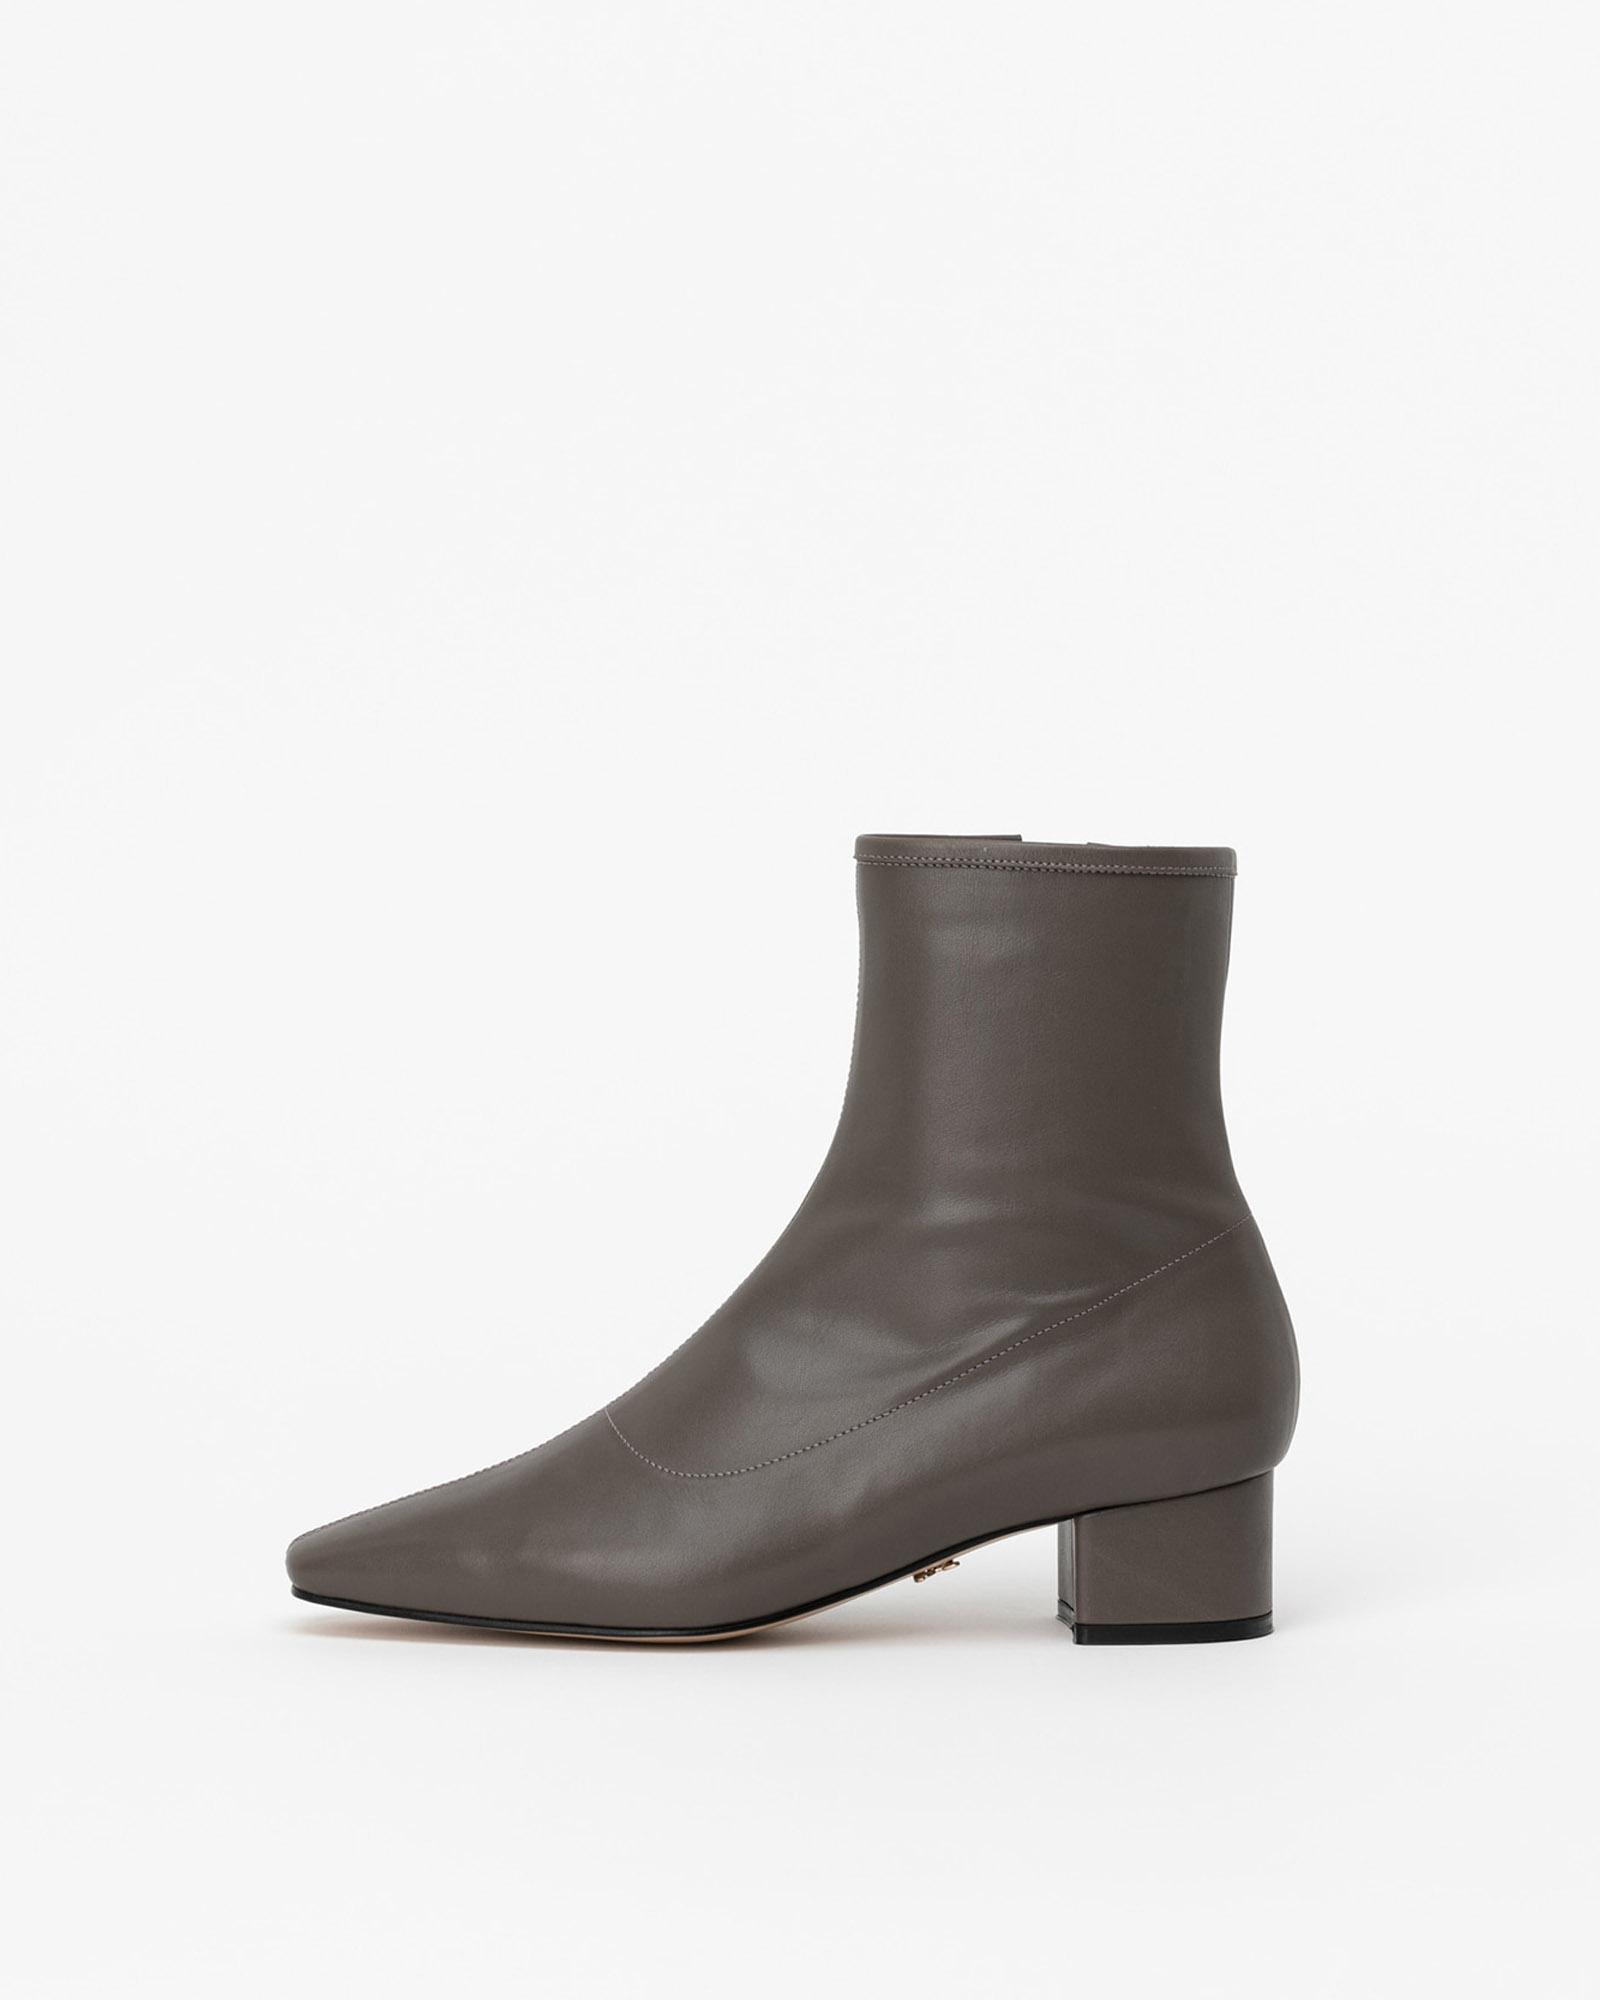 Monique Soft Boots in Solid Grey